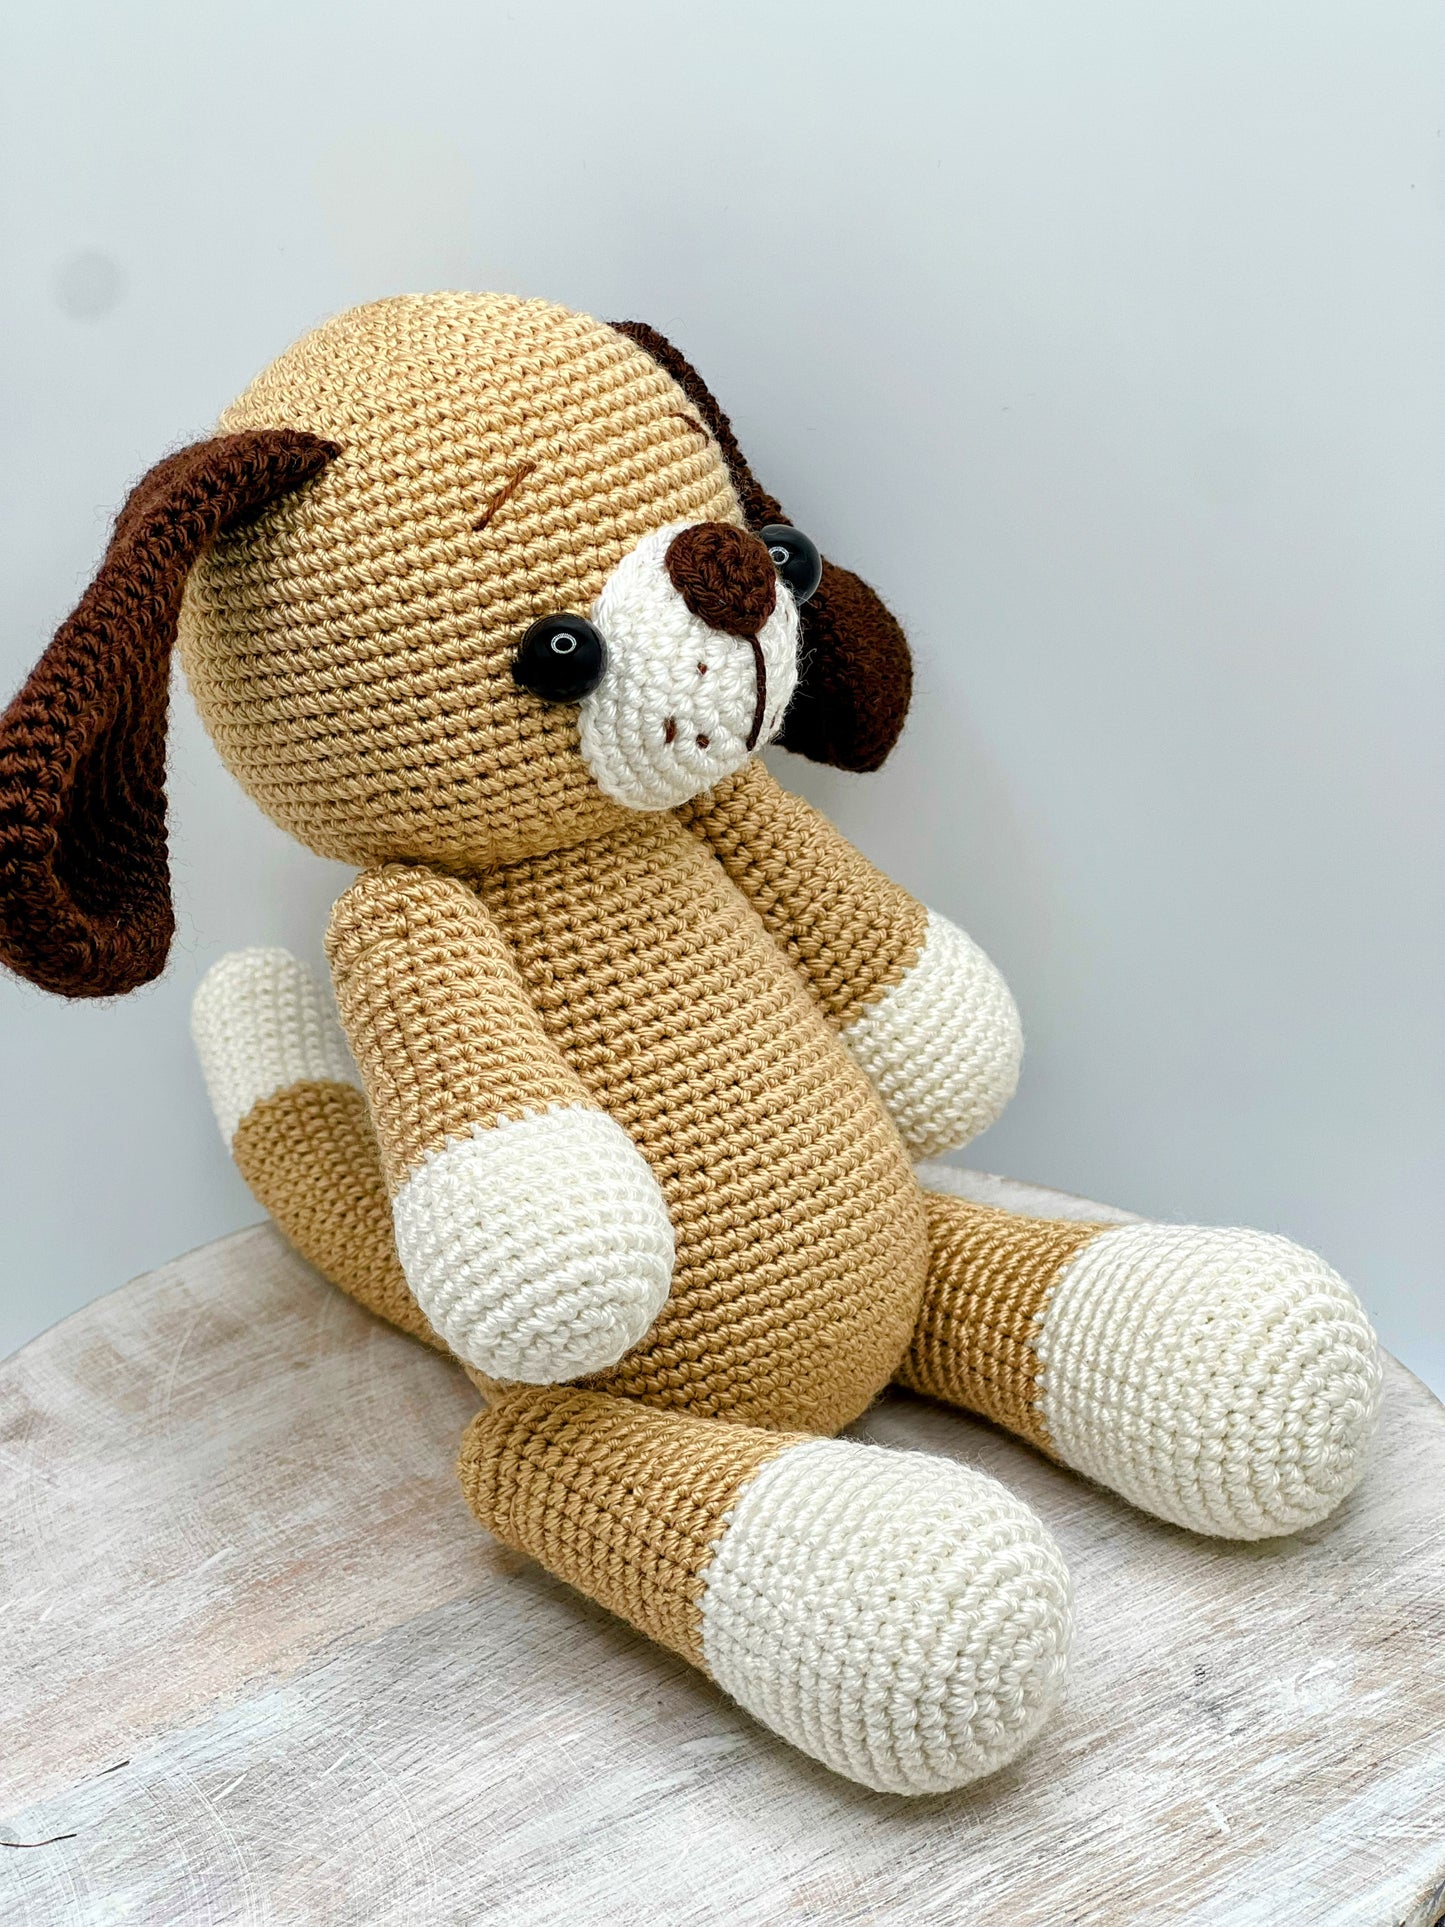 Stuffed Brown Dog Toy With Moving Legs - Crochet Knitted Amigurumi Toy